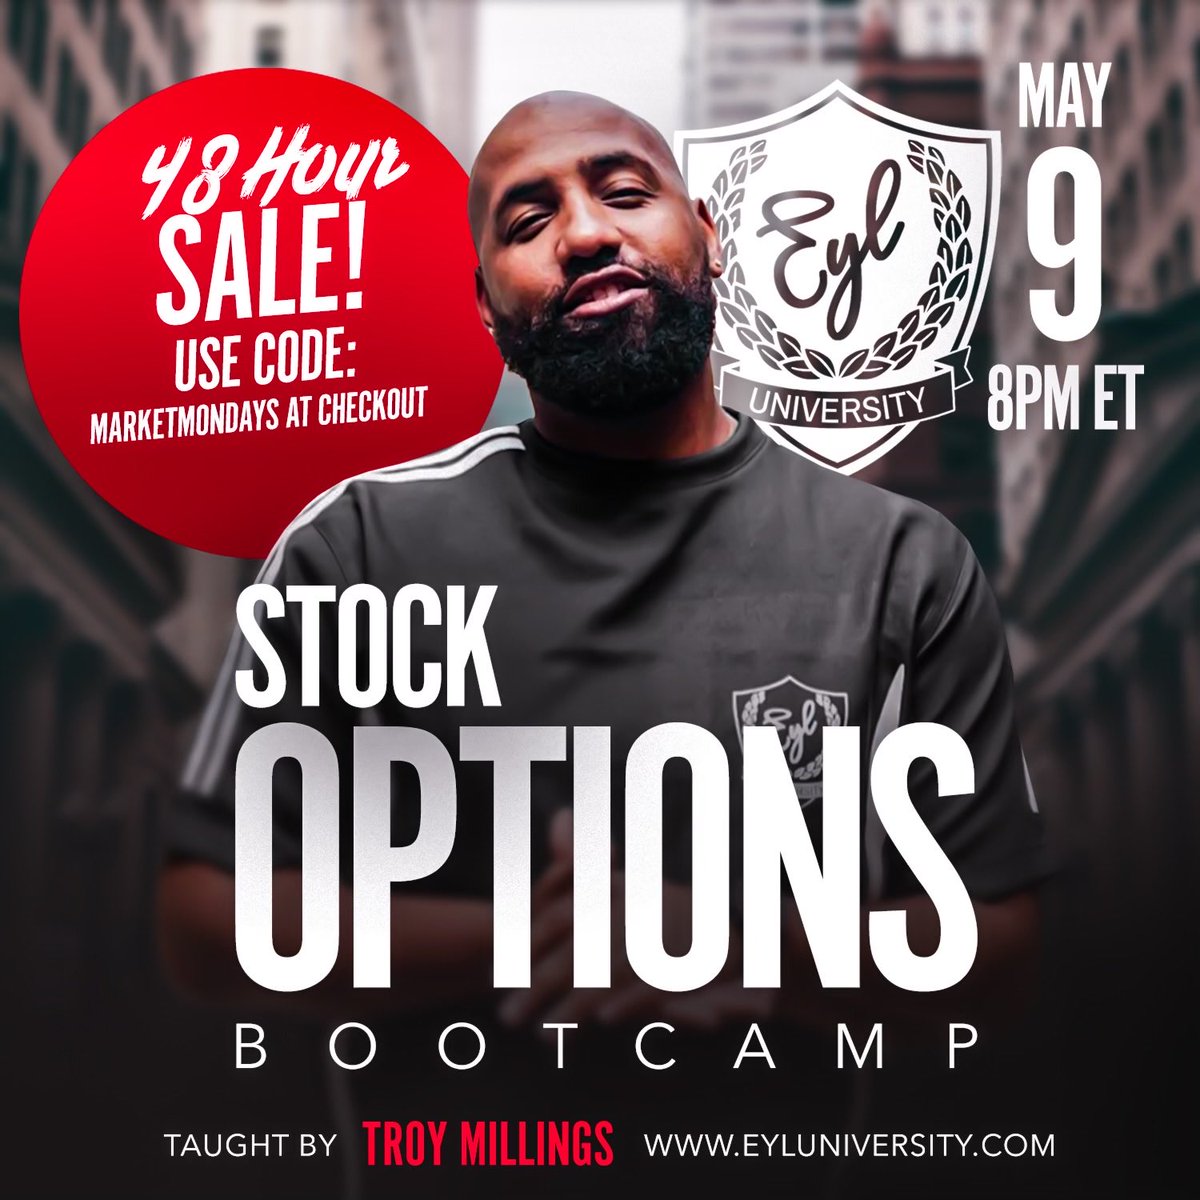 Troy will be teaching a Stock Option Boot Camp this Thursday at 8 PM EST on EYL University. Everything will be covered! 48-hour Enrollment sale on EYL University website. Enter code: marketmondays at checkout. Link below. eyluniversity.com